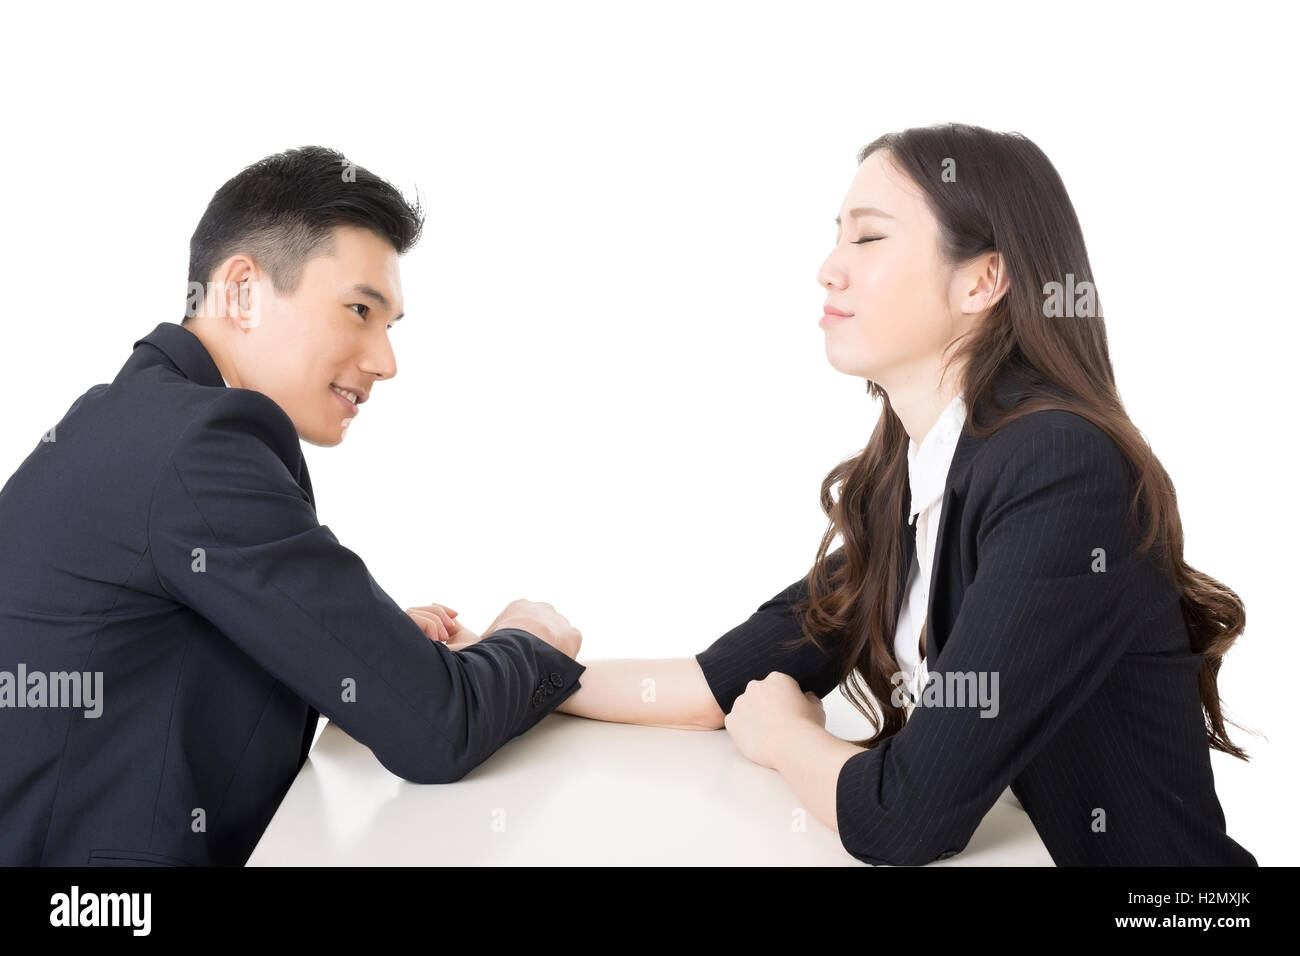 business arm wrestling Stock Photo